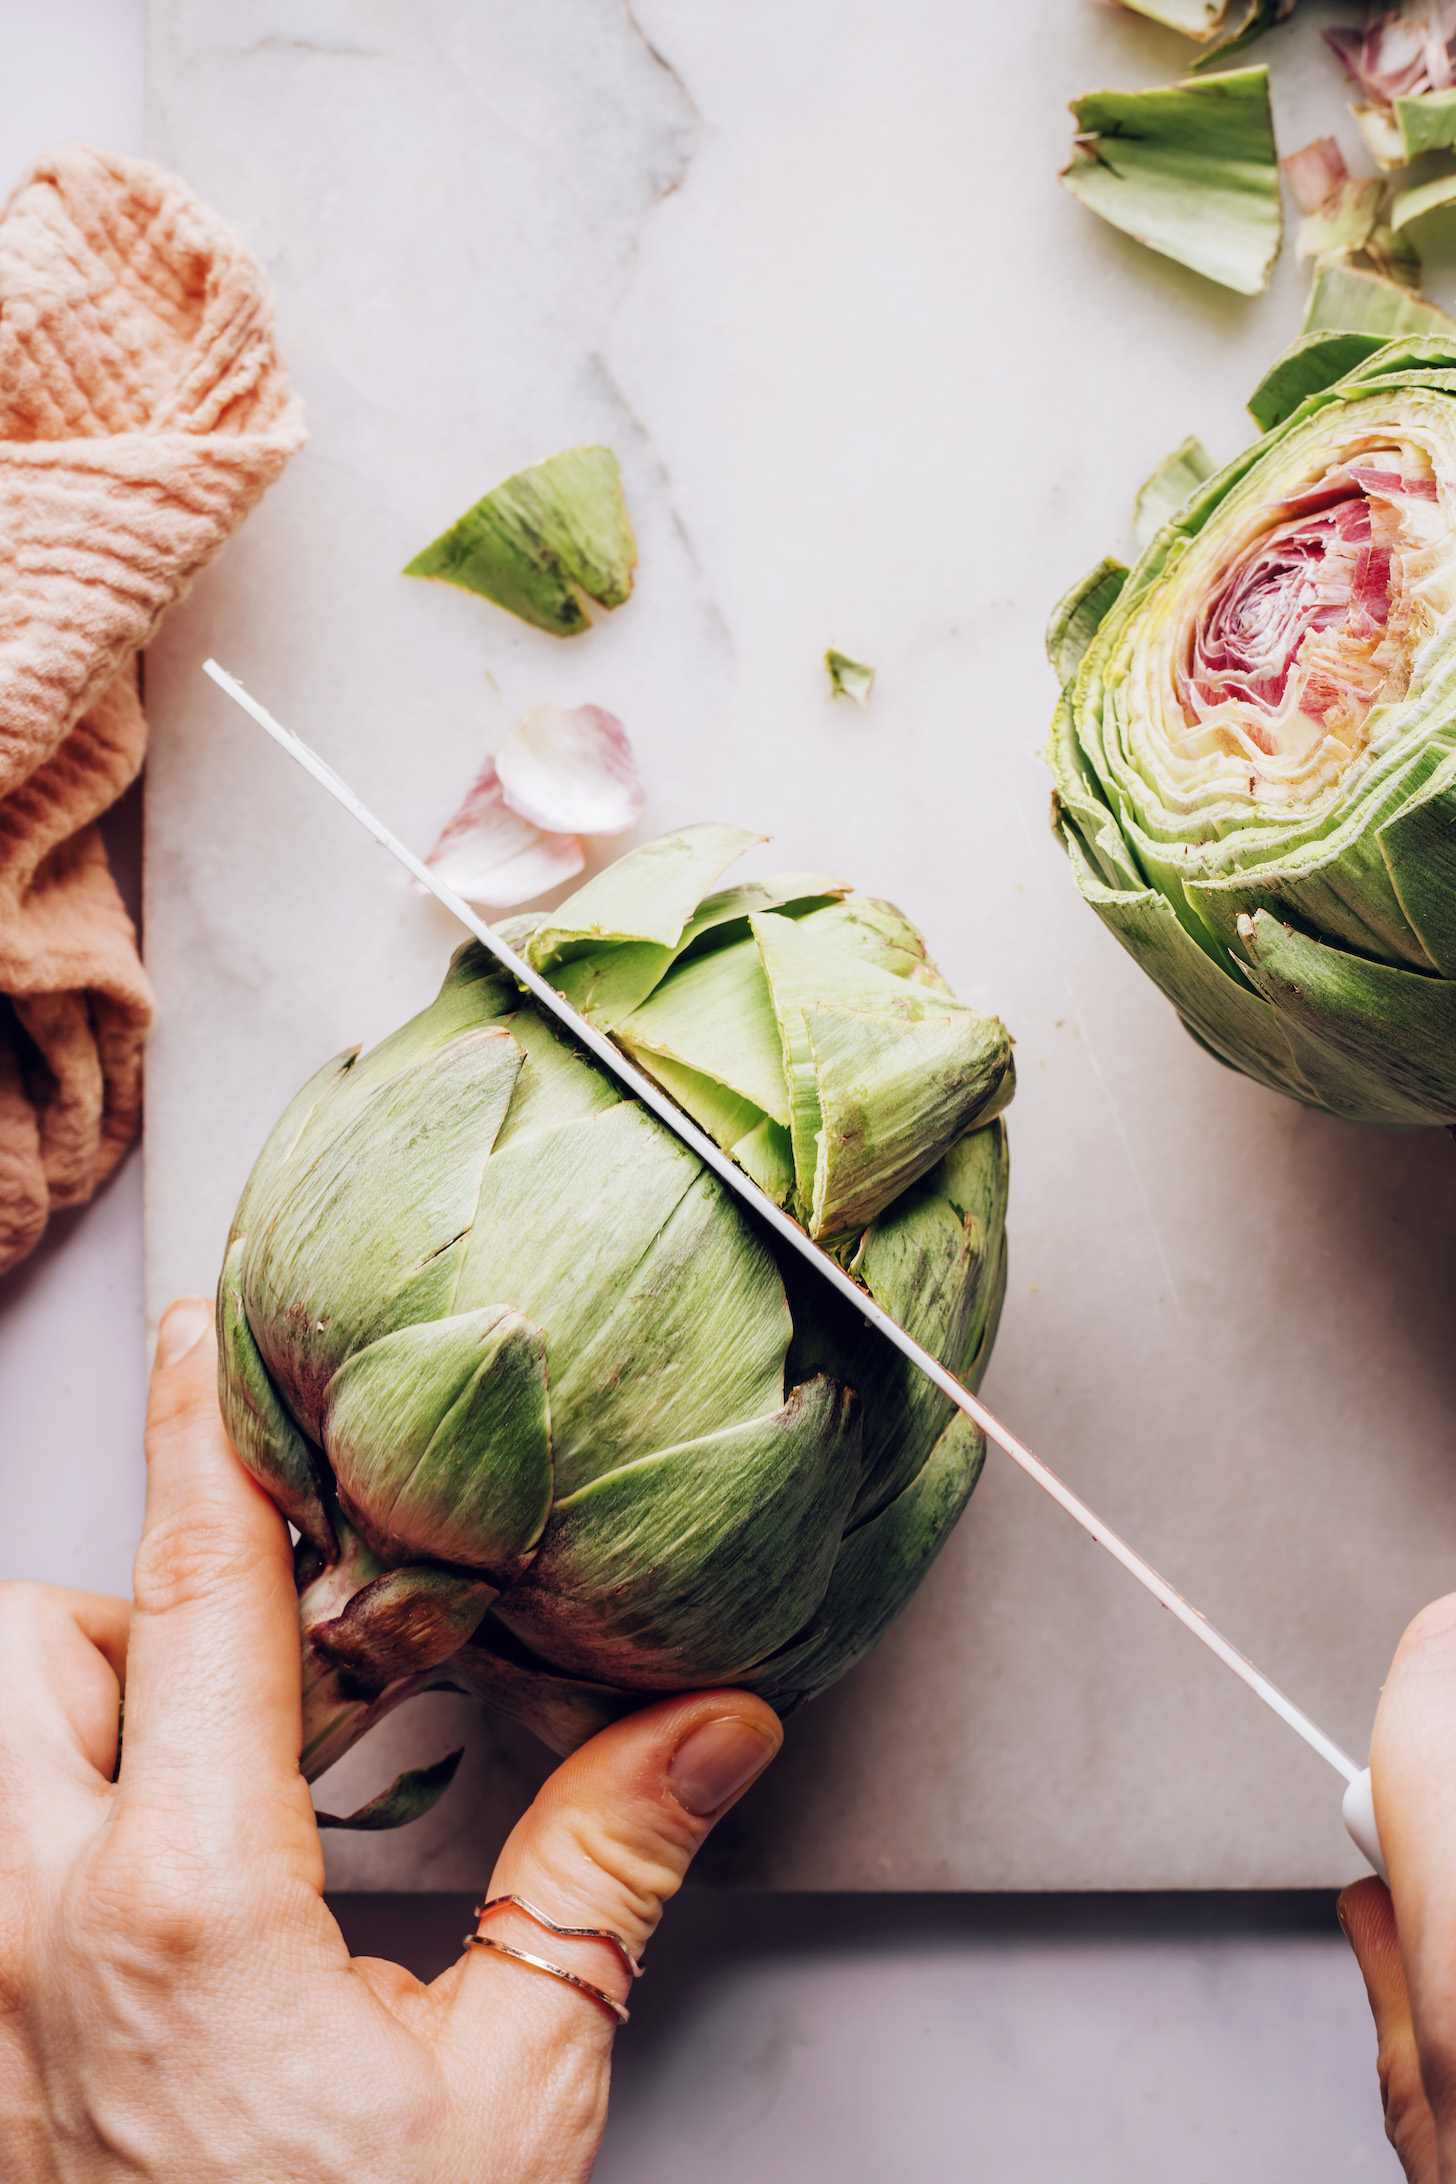 Showing how to prep an artichoke by slicing off the top